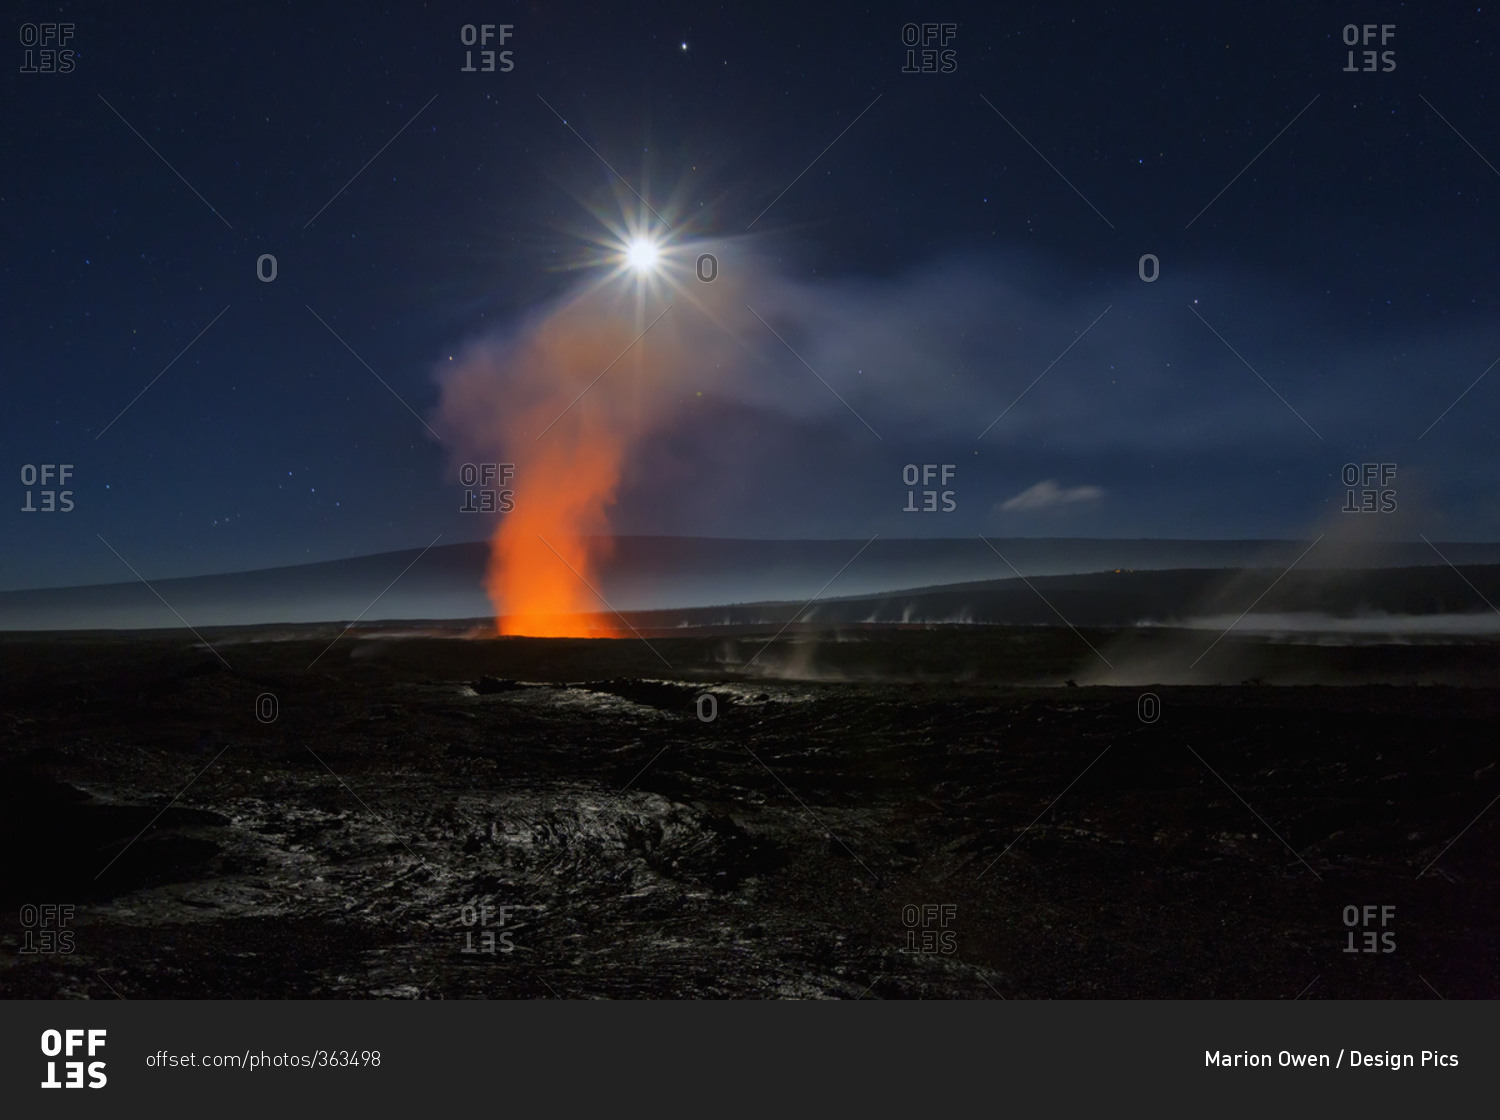 Full moon over Halemaumau Crater within the much larger summit caldera of Kilauea in Hawaii Volcanoes National Park, steaming vents in foreground, Mauna Loa mountain in background; Island of Hawaii, Hawaii, United States of America